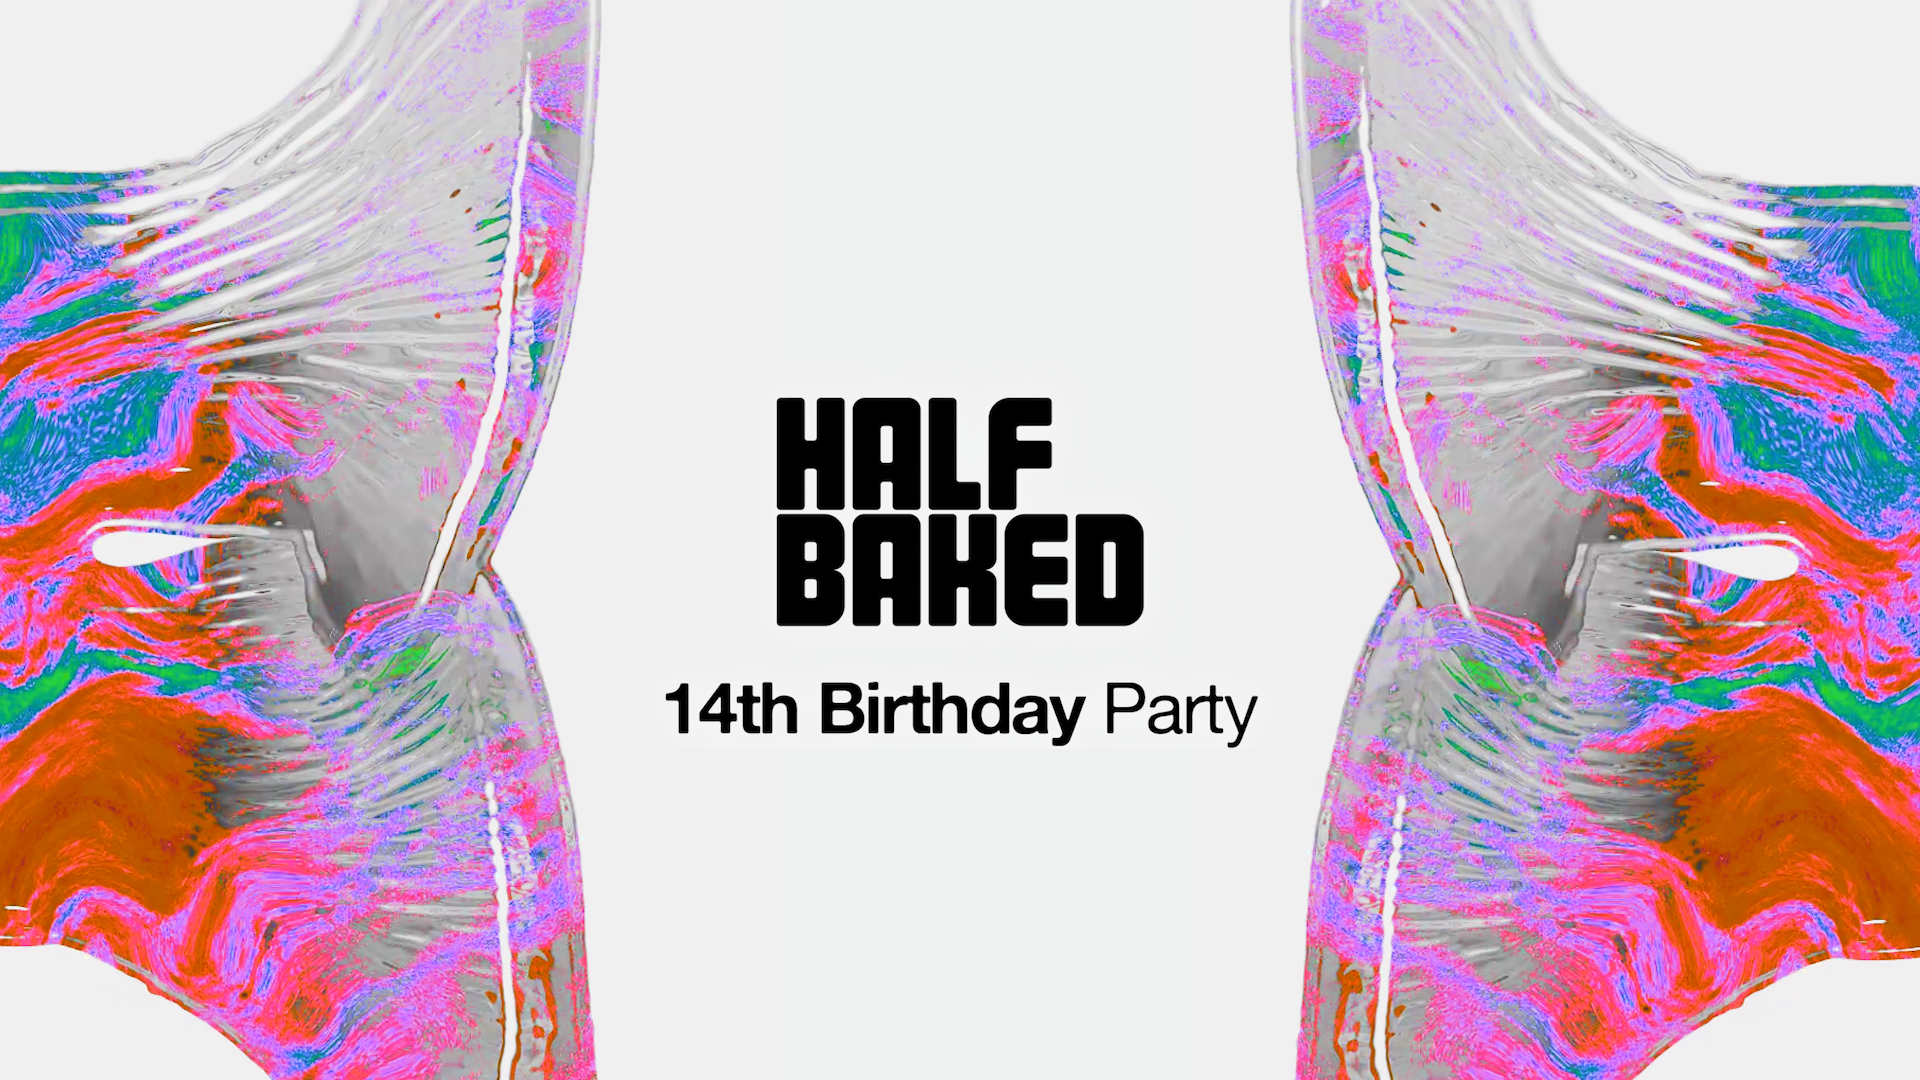 Half Baked 14th Birthday with Margaret Dygas, Christian AB - 20 hour party - Página frontal